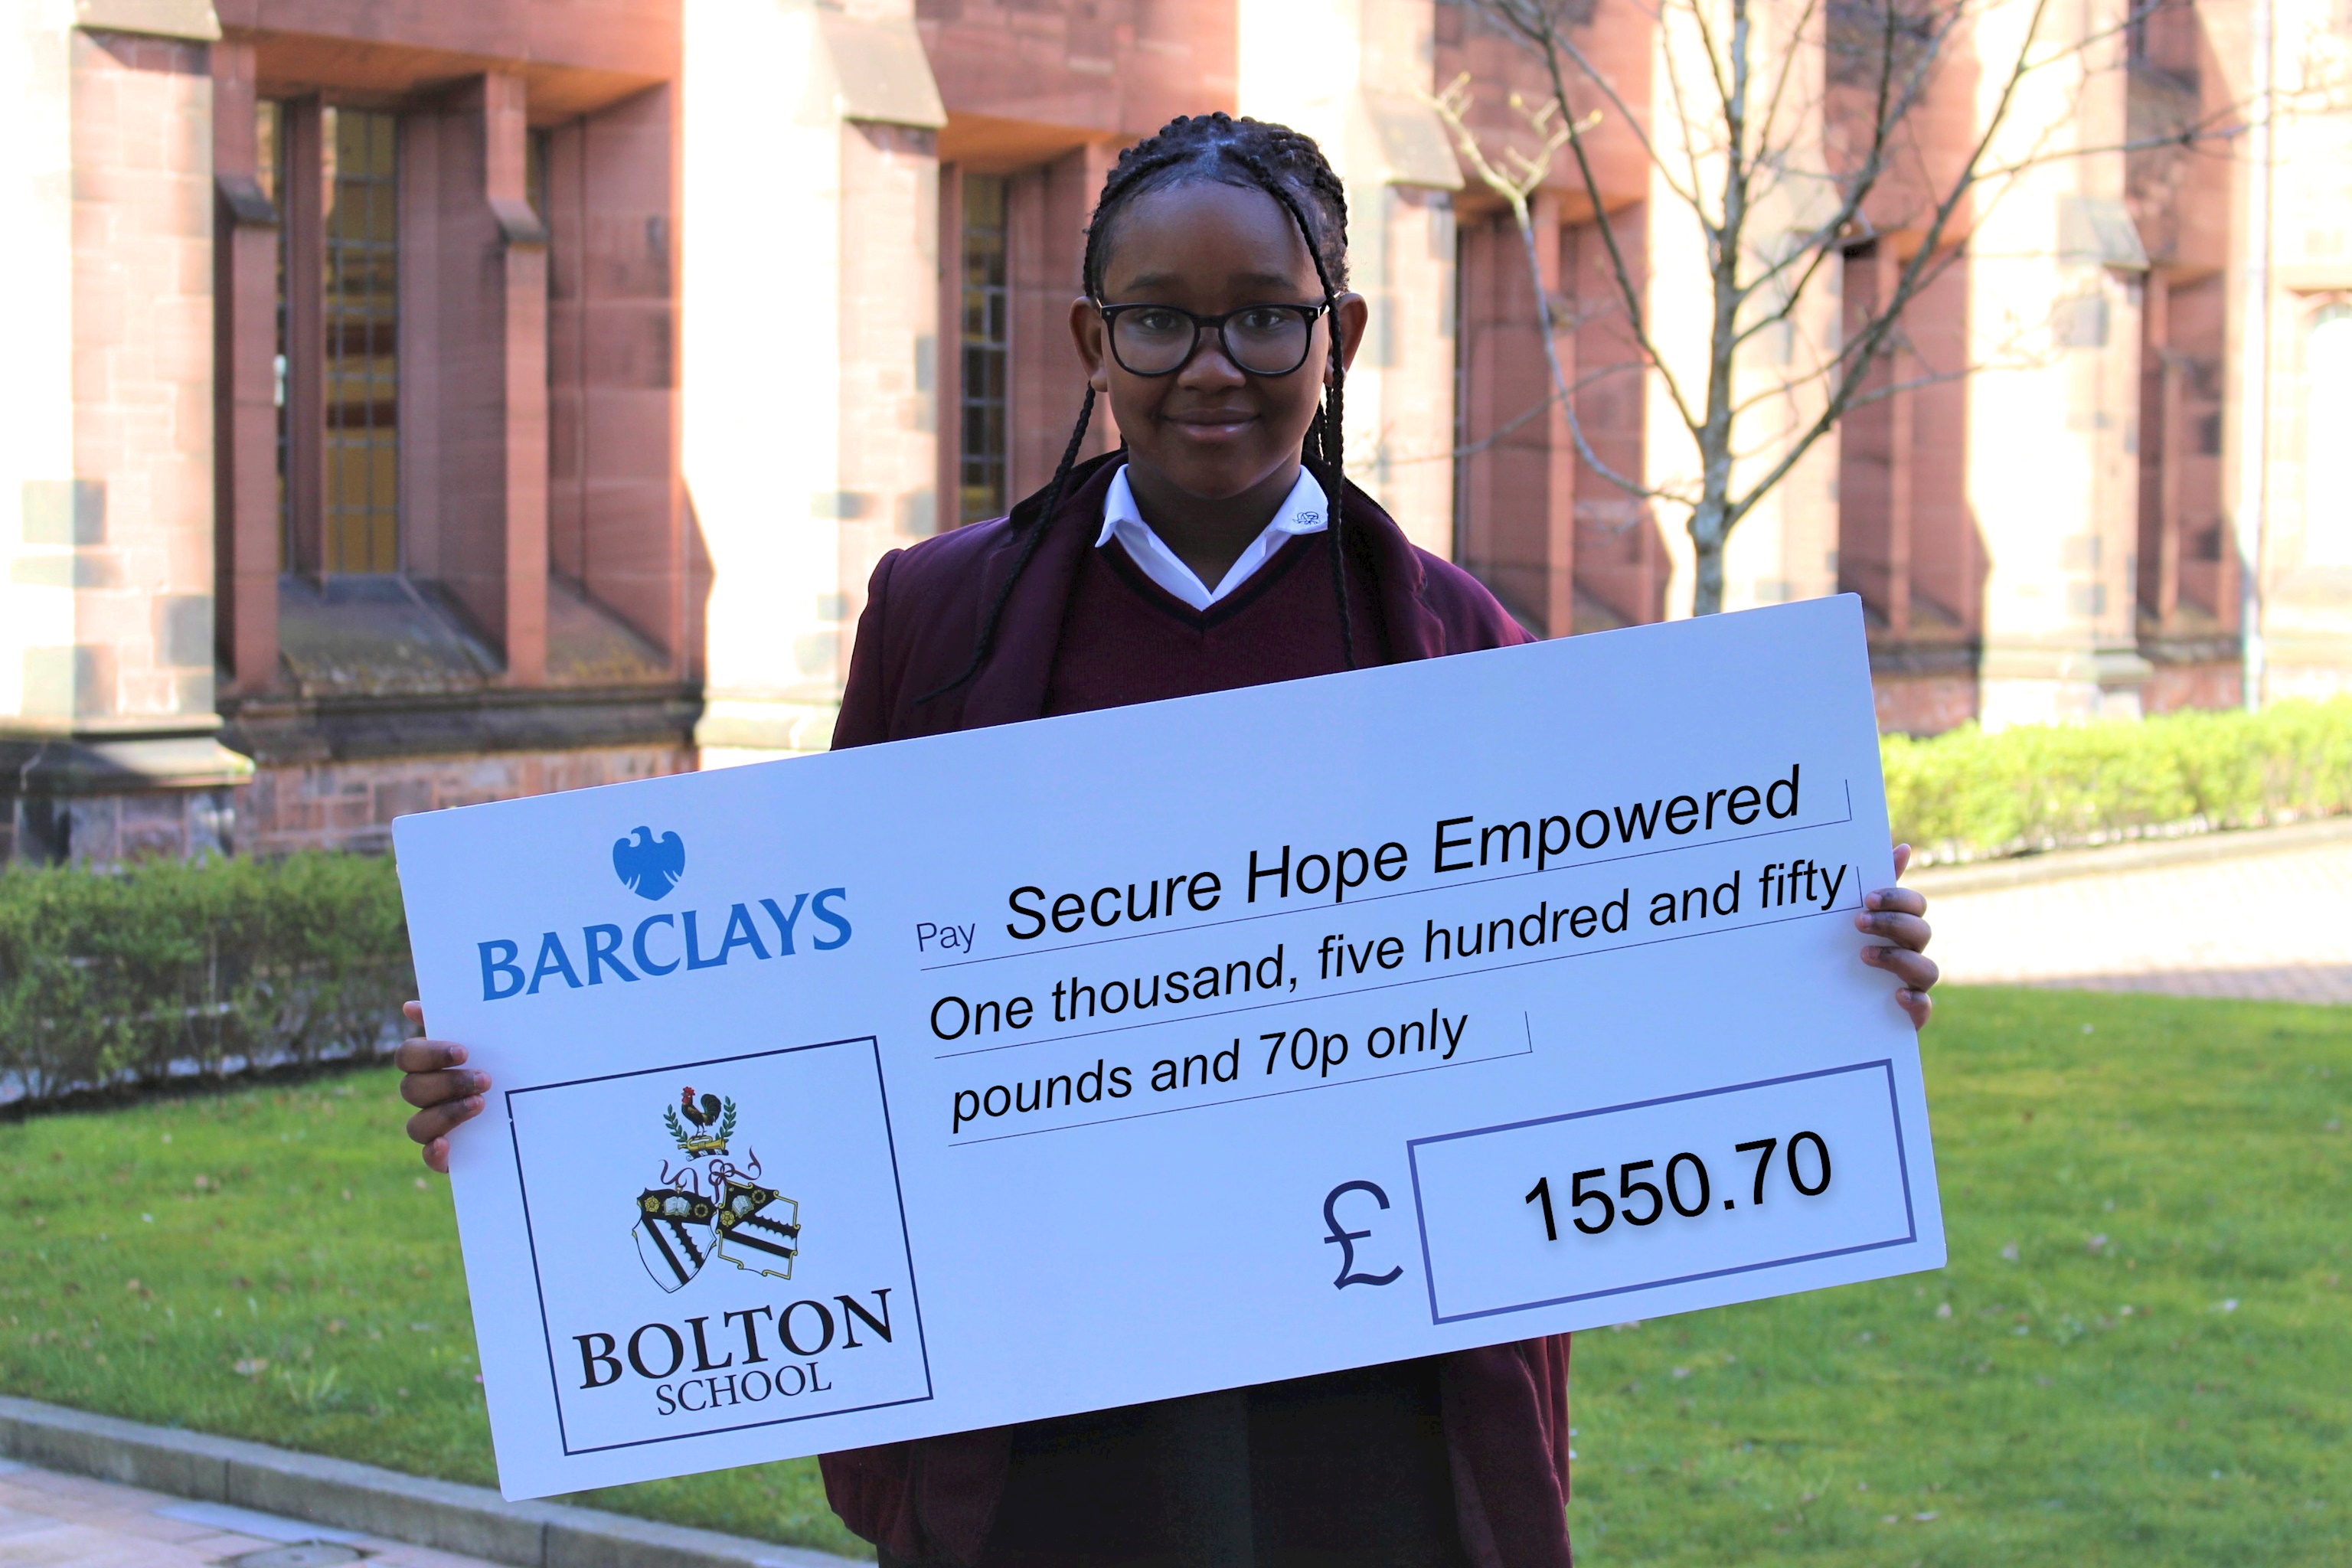 Funds Raised for Secure Hope Empowered